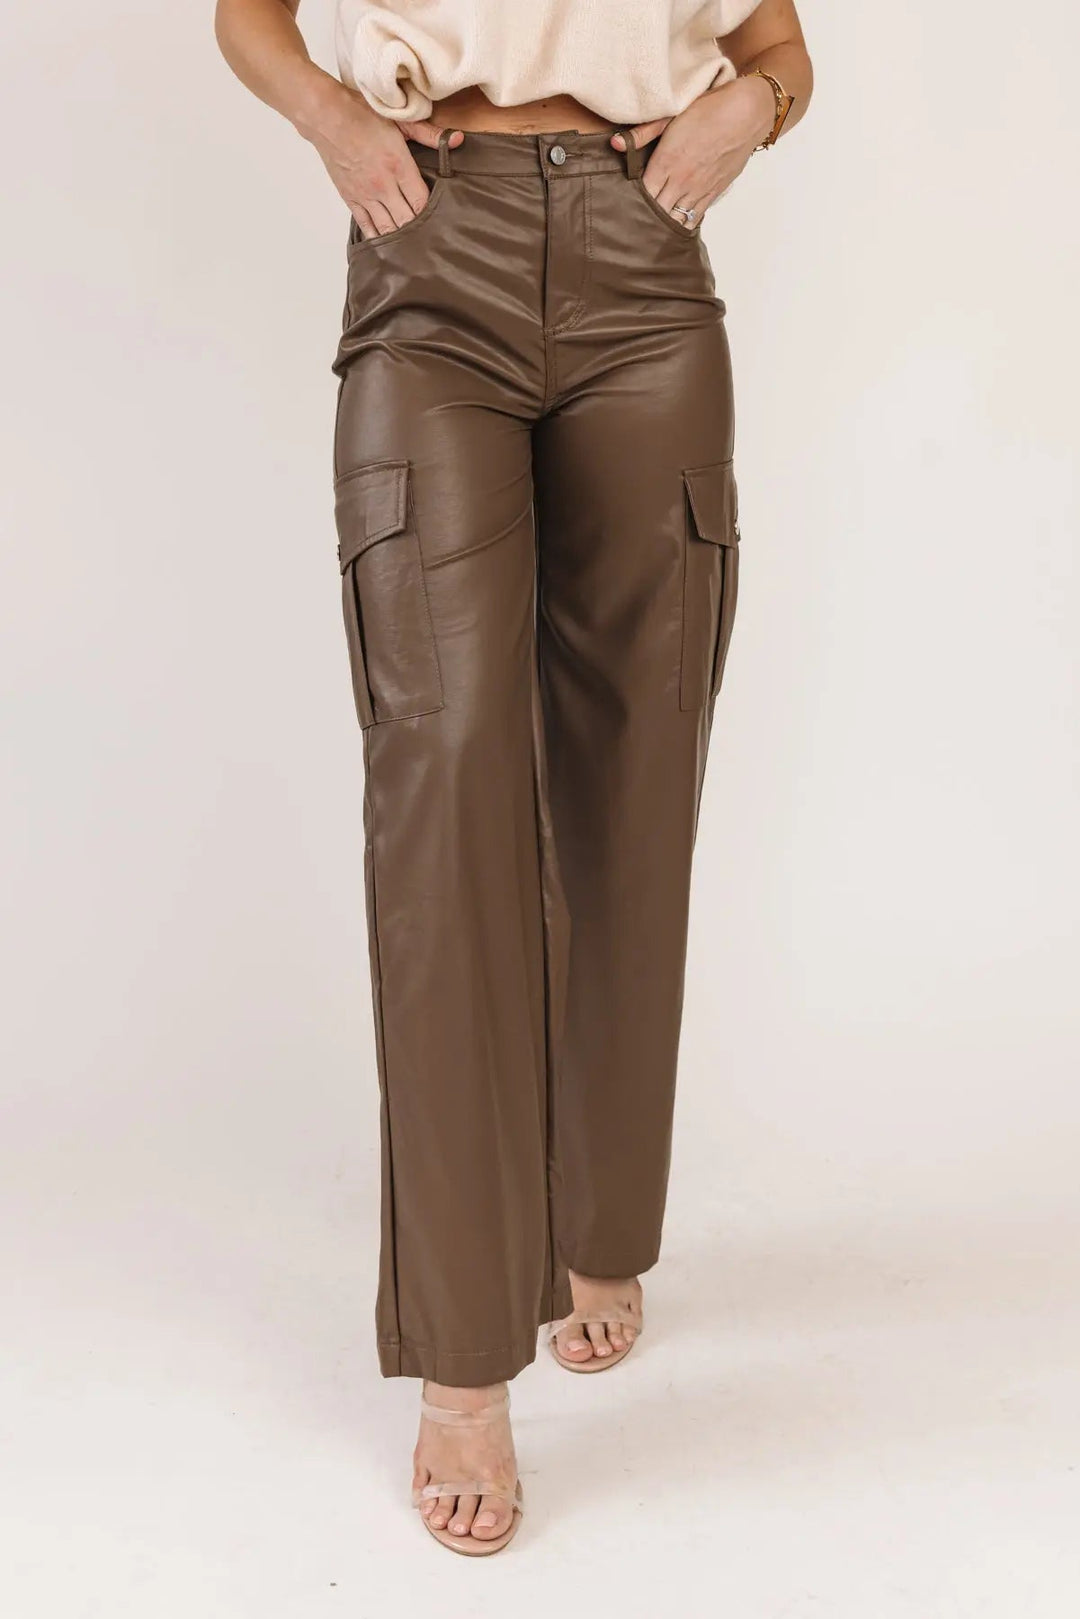 Trendy Girl Brown Faux Leather Pants: Transition from Day to Night